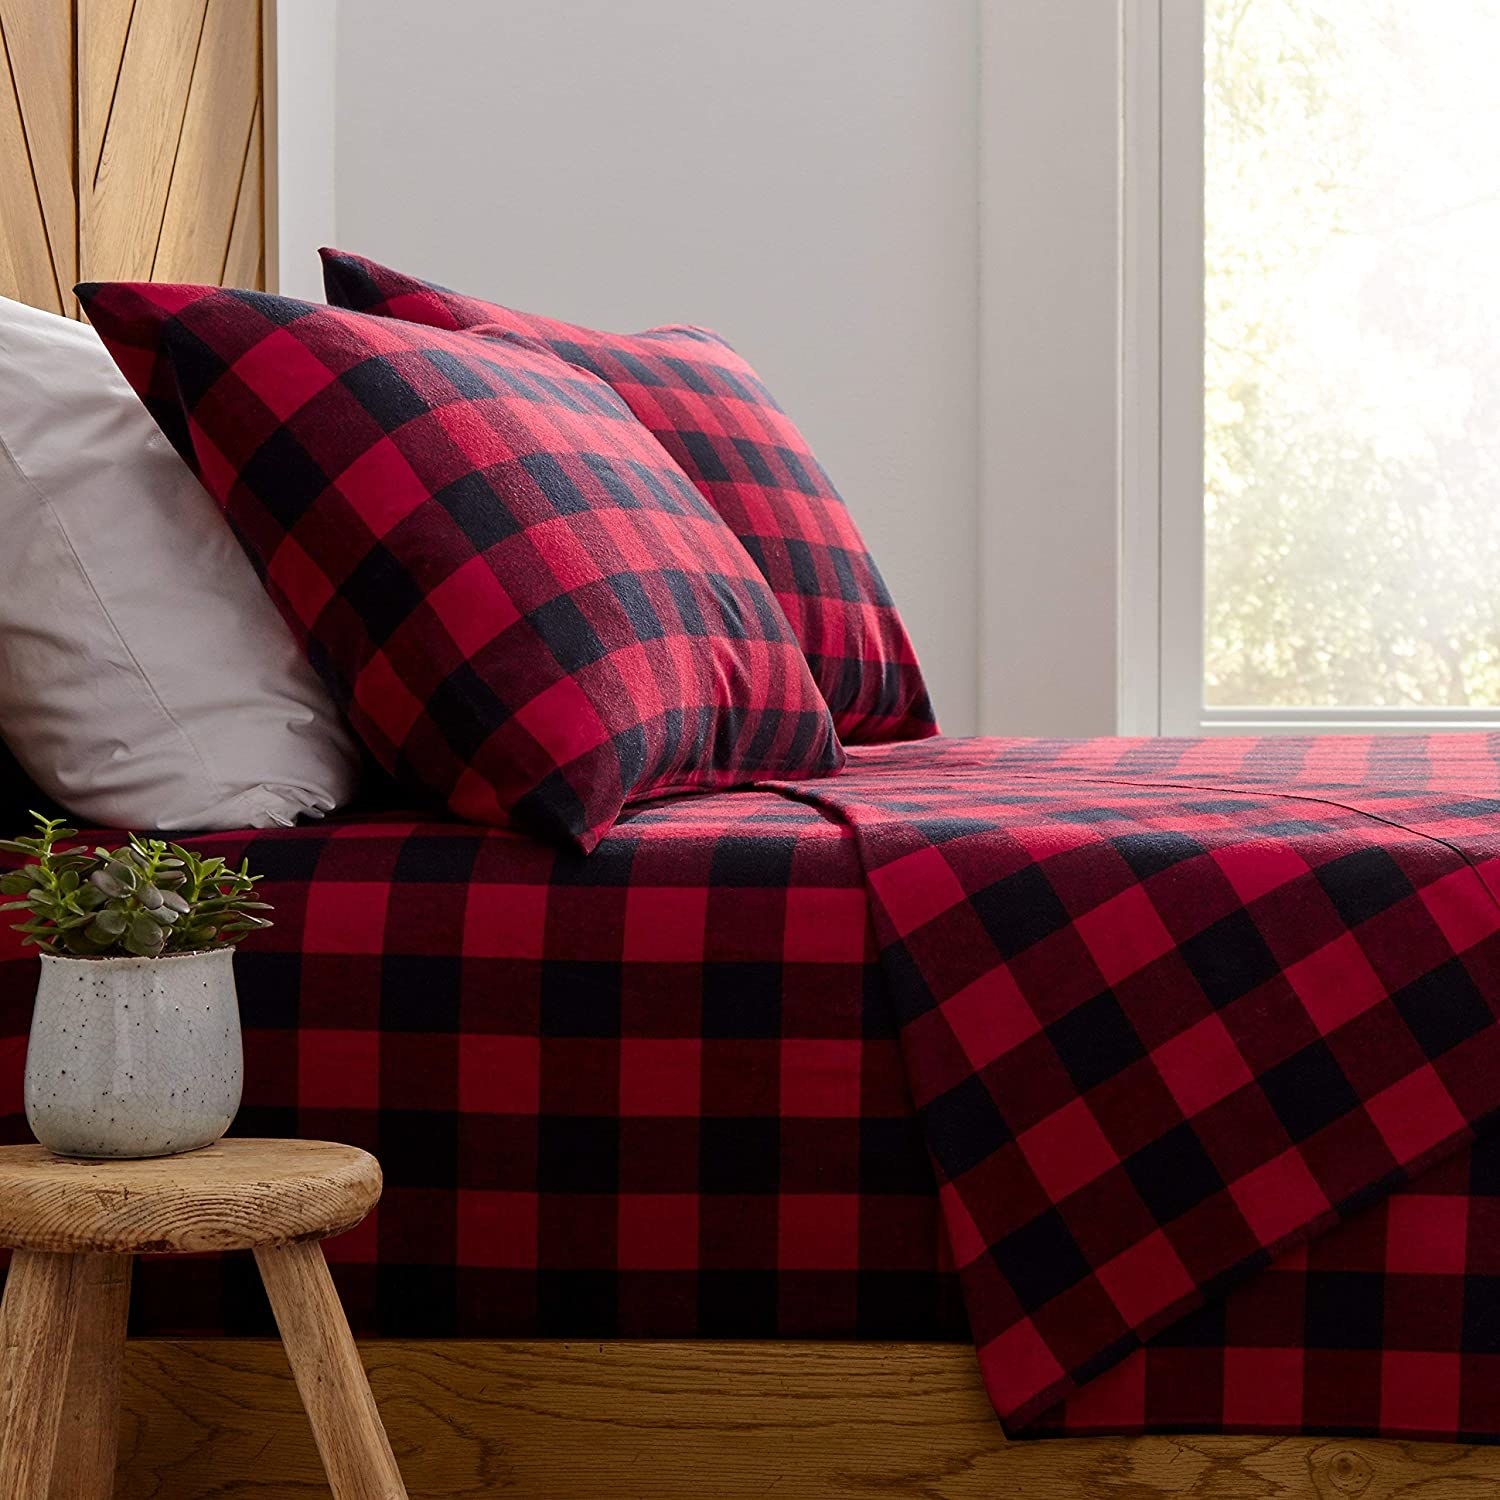 a set of cozy flannel bed sheets on a neatly made up bed